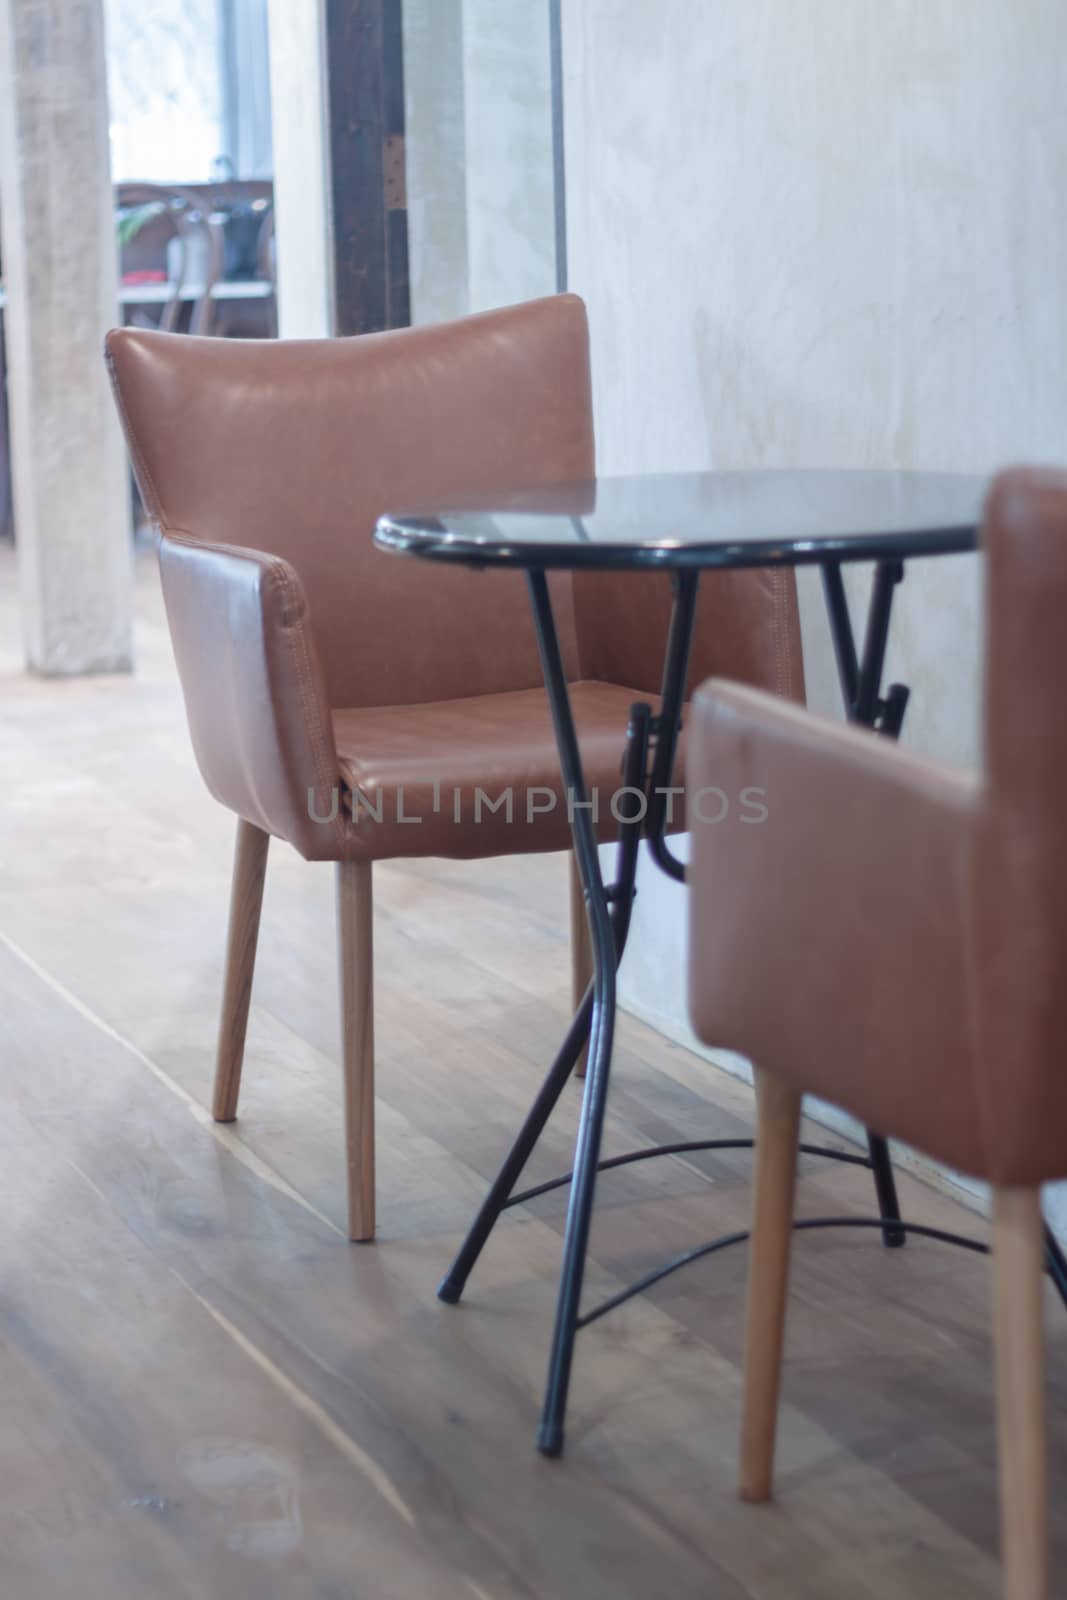 Table decorated in coffee shop, stock photo